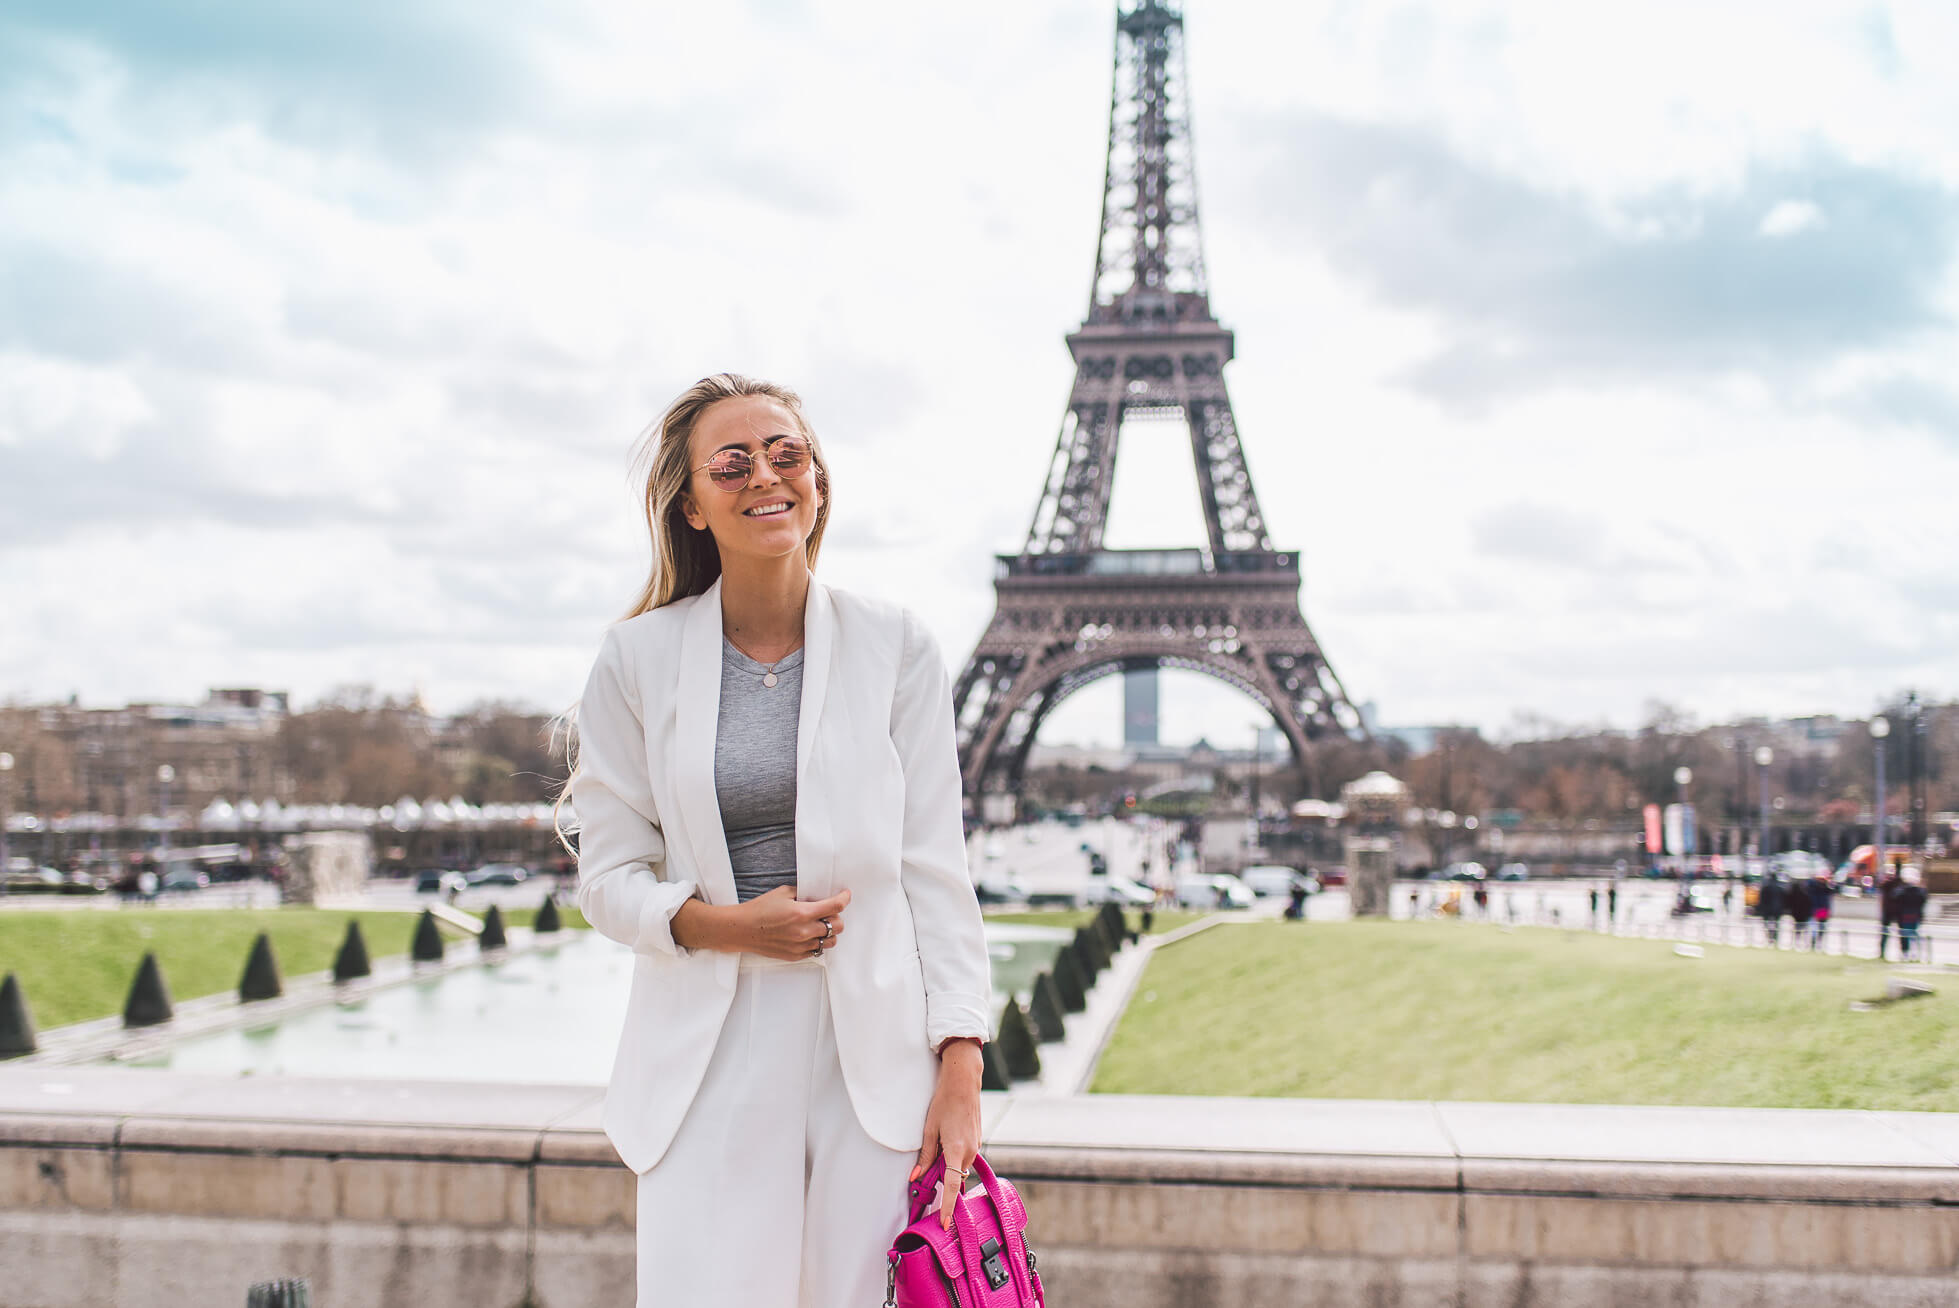 janni-deler-paris-guided-by-style-ginatricotDSC_2020